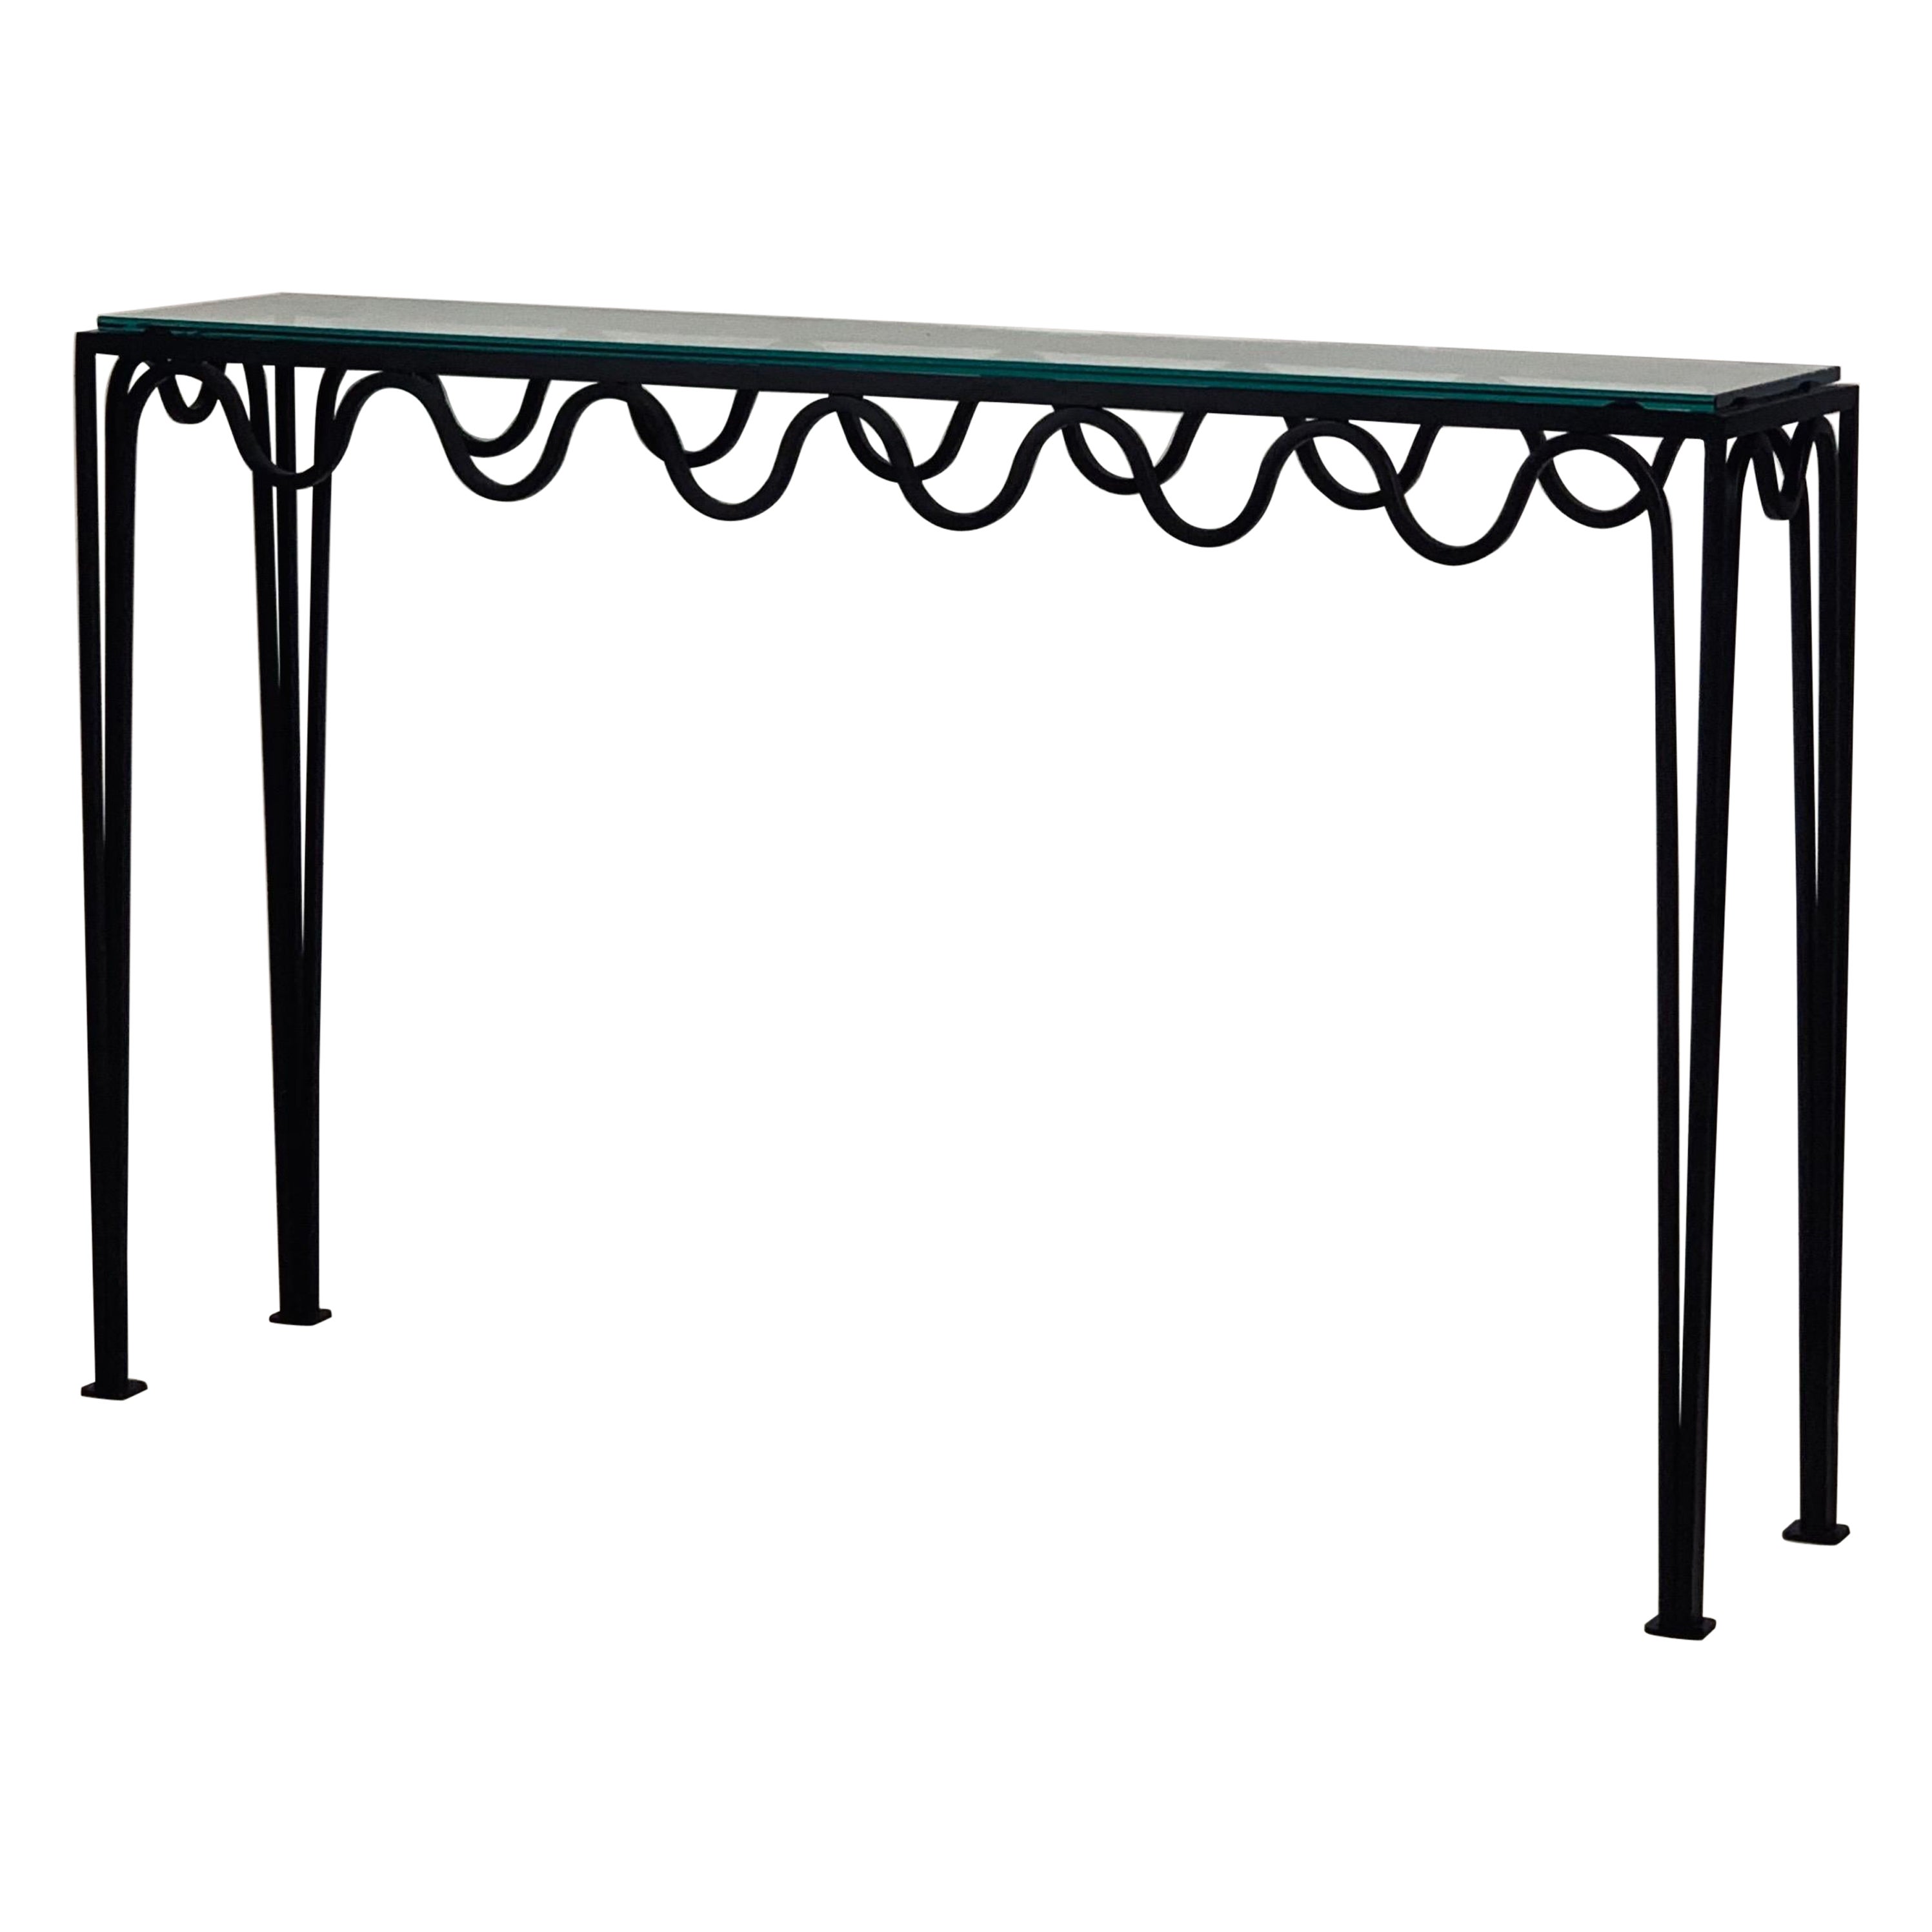 Long Undulating 'Méandre' Wrought Iron and Glass Console by Design Frères For Sale